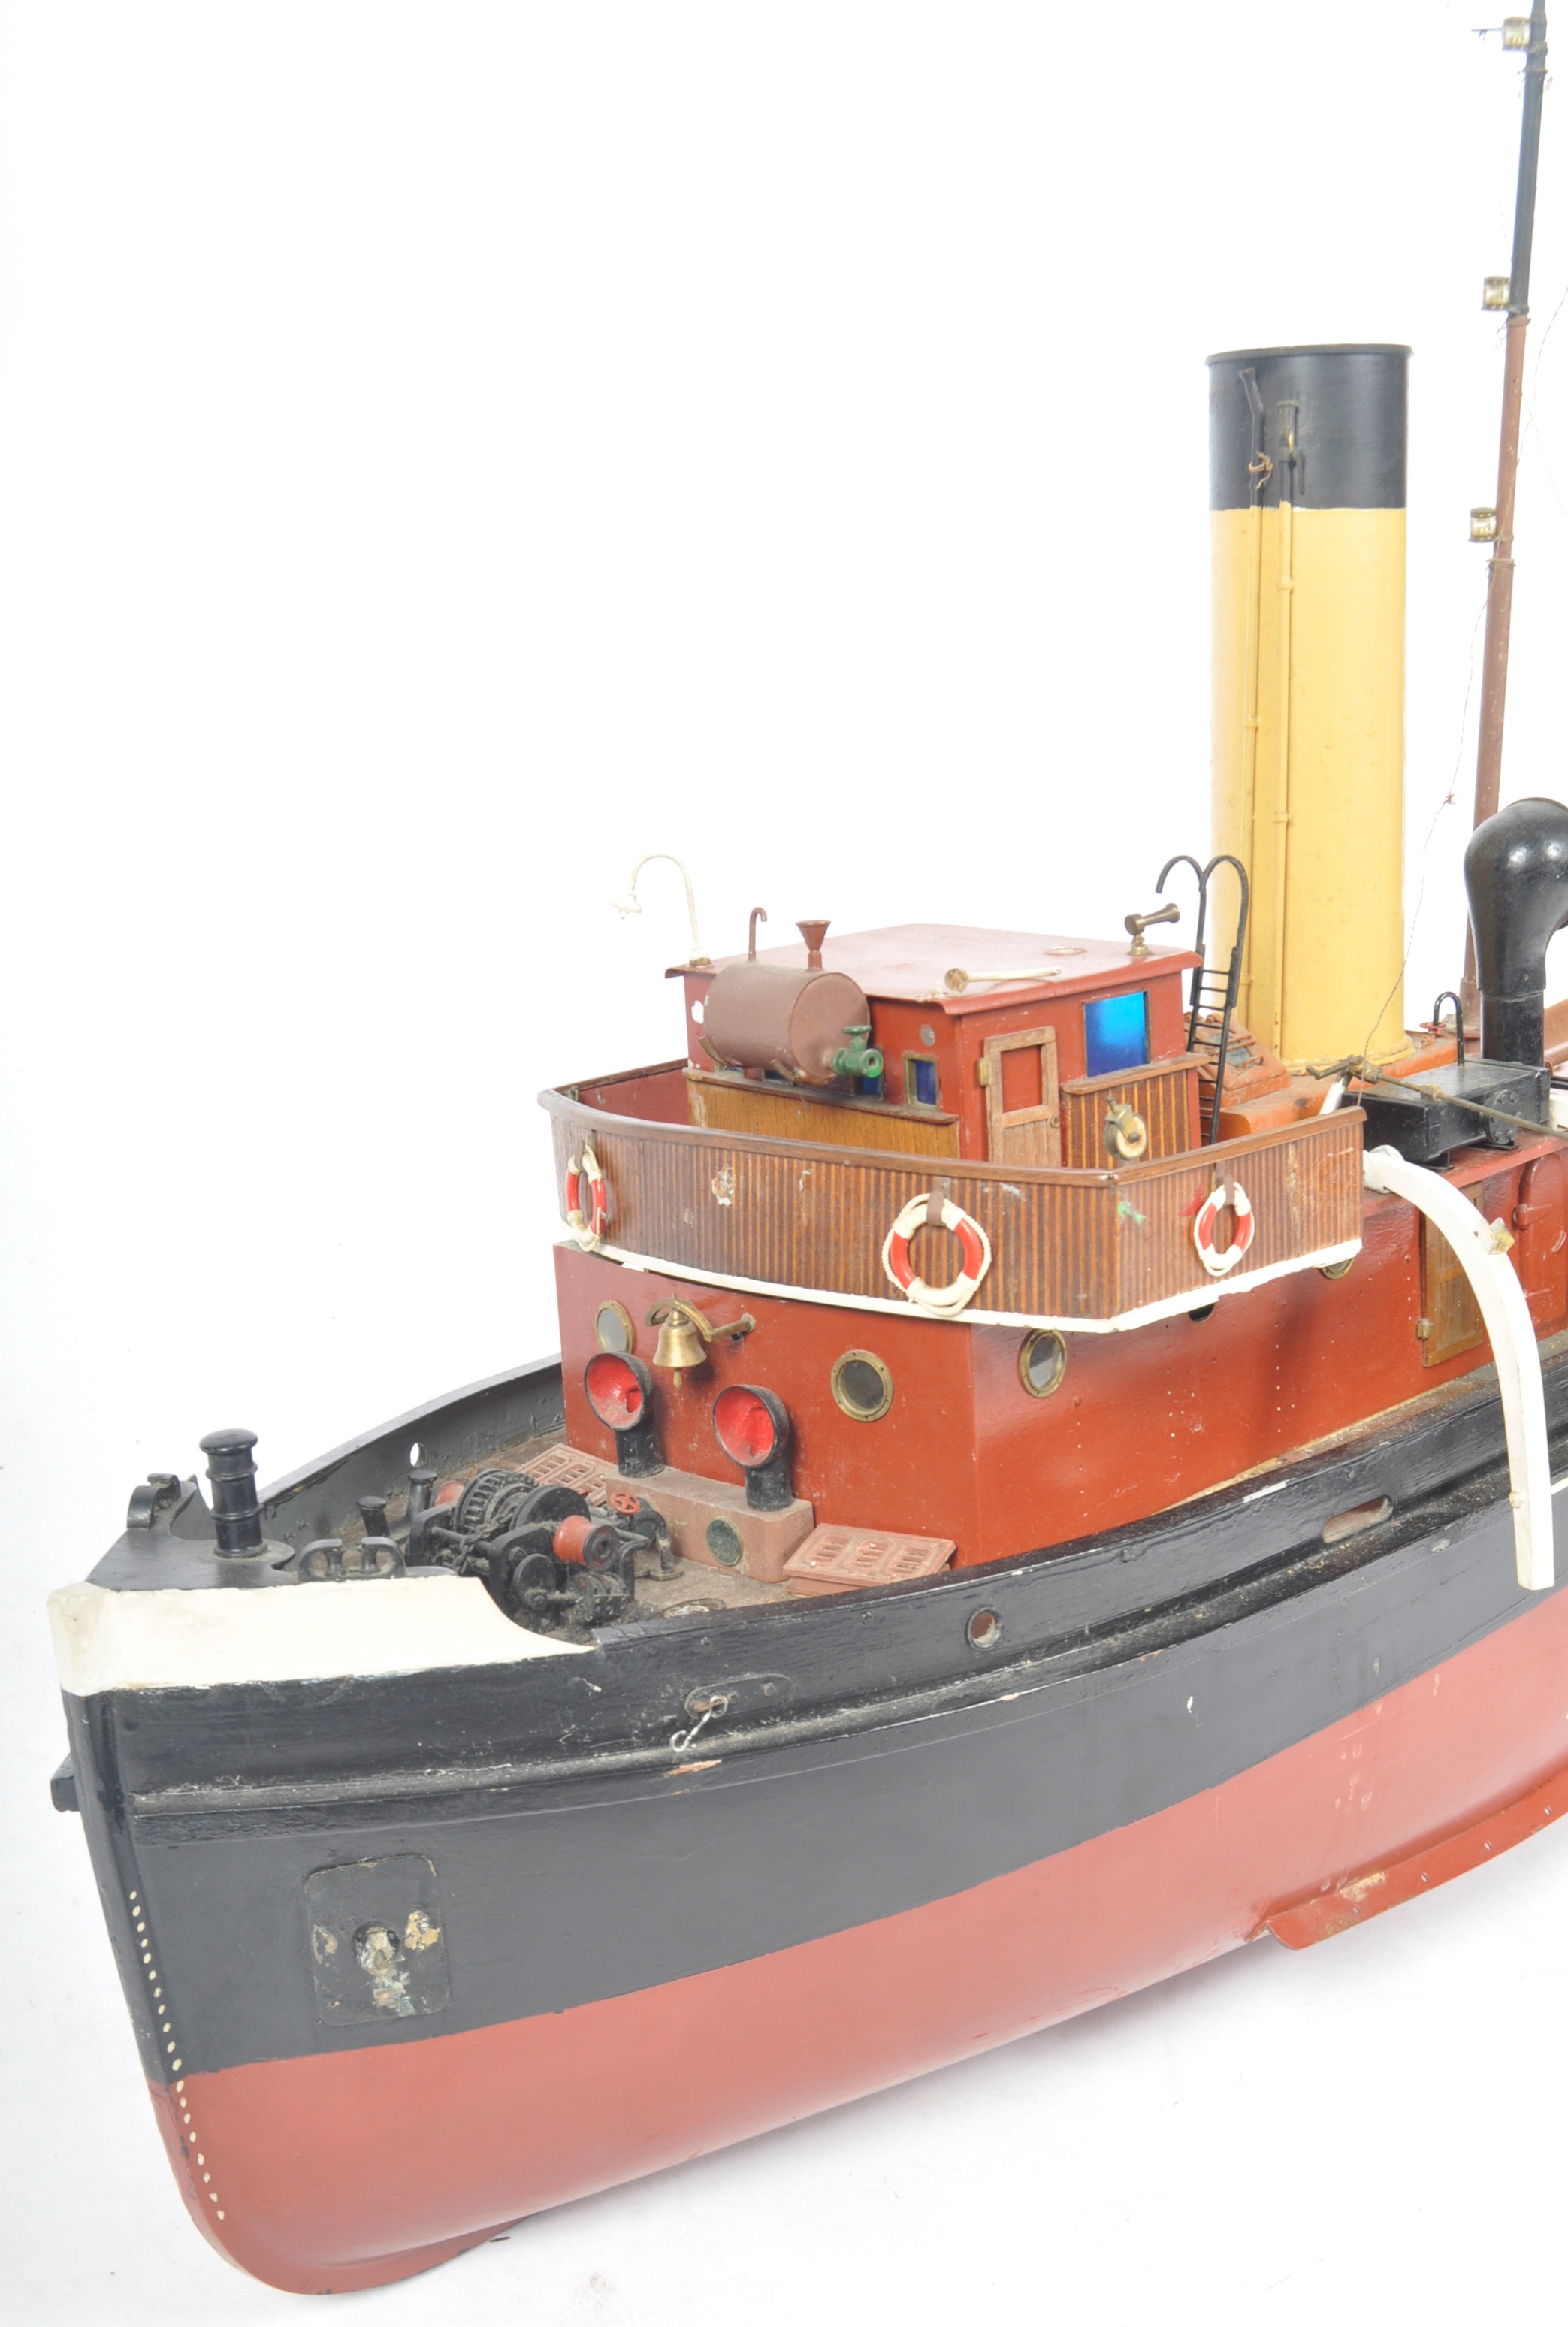 20TH CENTURY SCRATCH BUILT MODEL OF A 19TH CENTURY TUG BOAT - Image 2 of 7